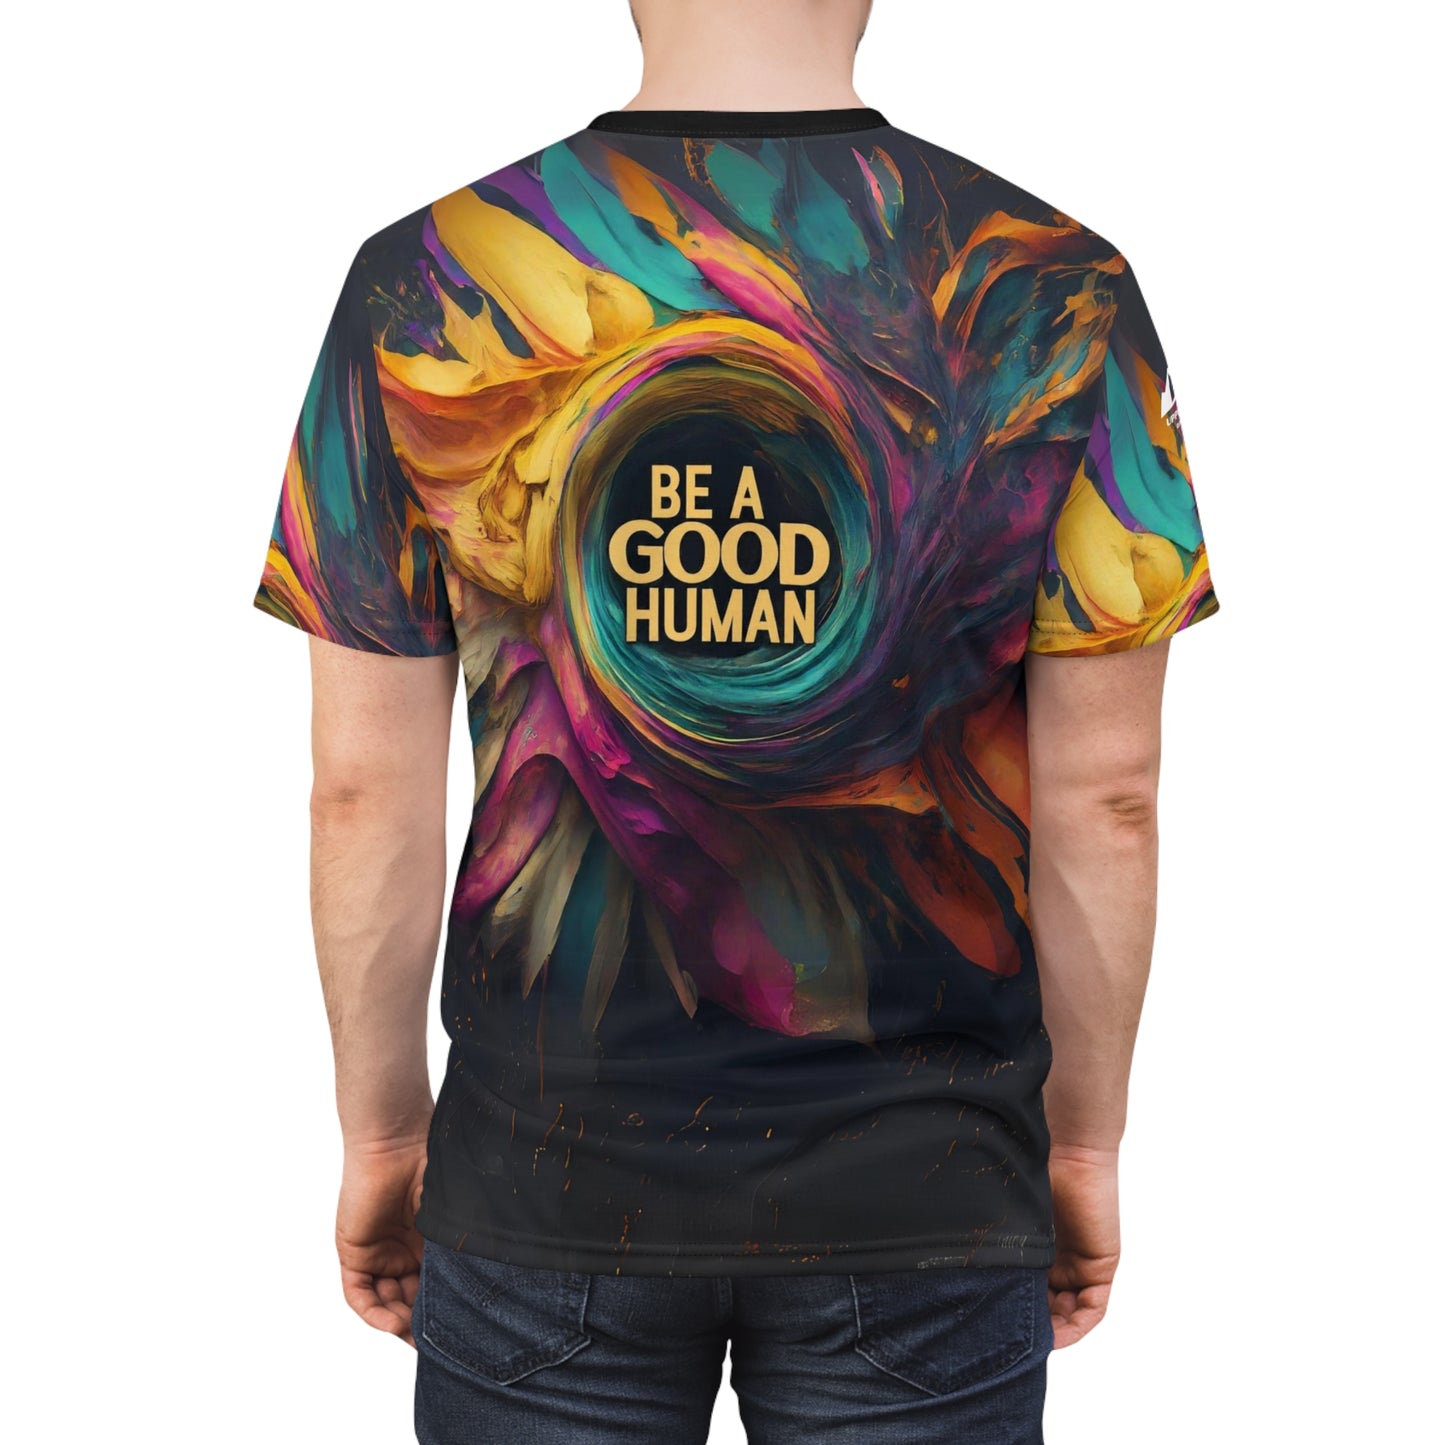 "Be a Good Human" Unisex All Over Print Jersey